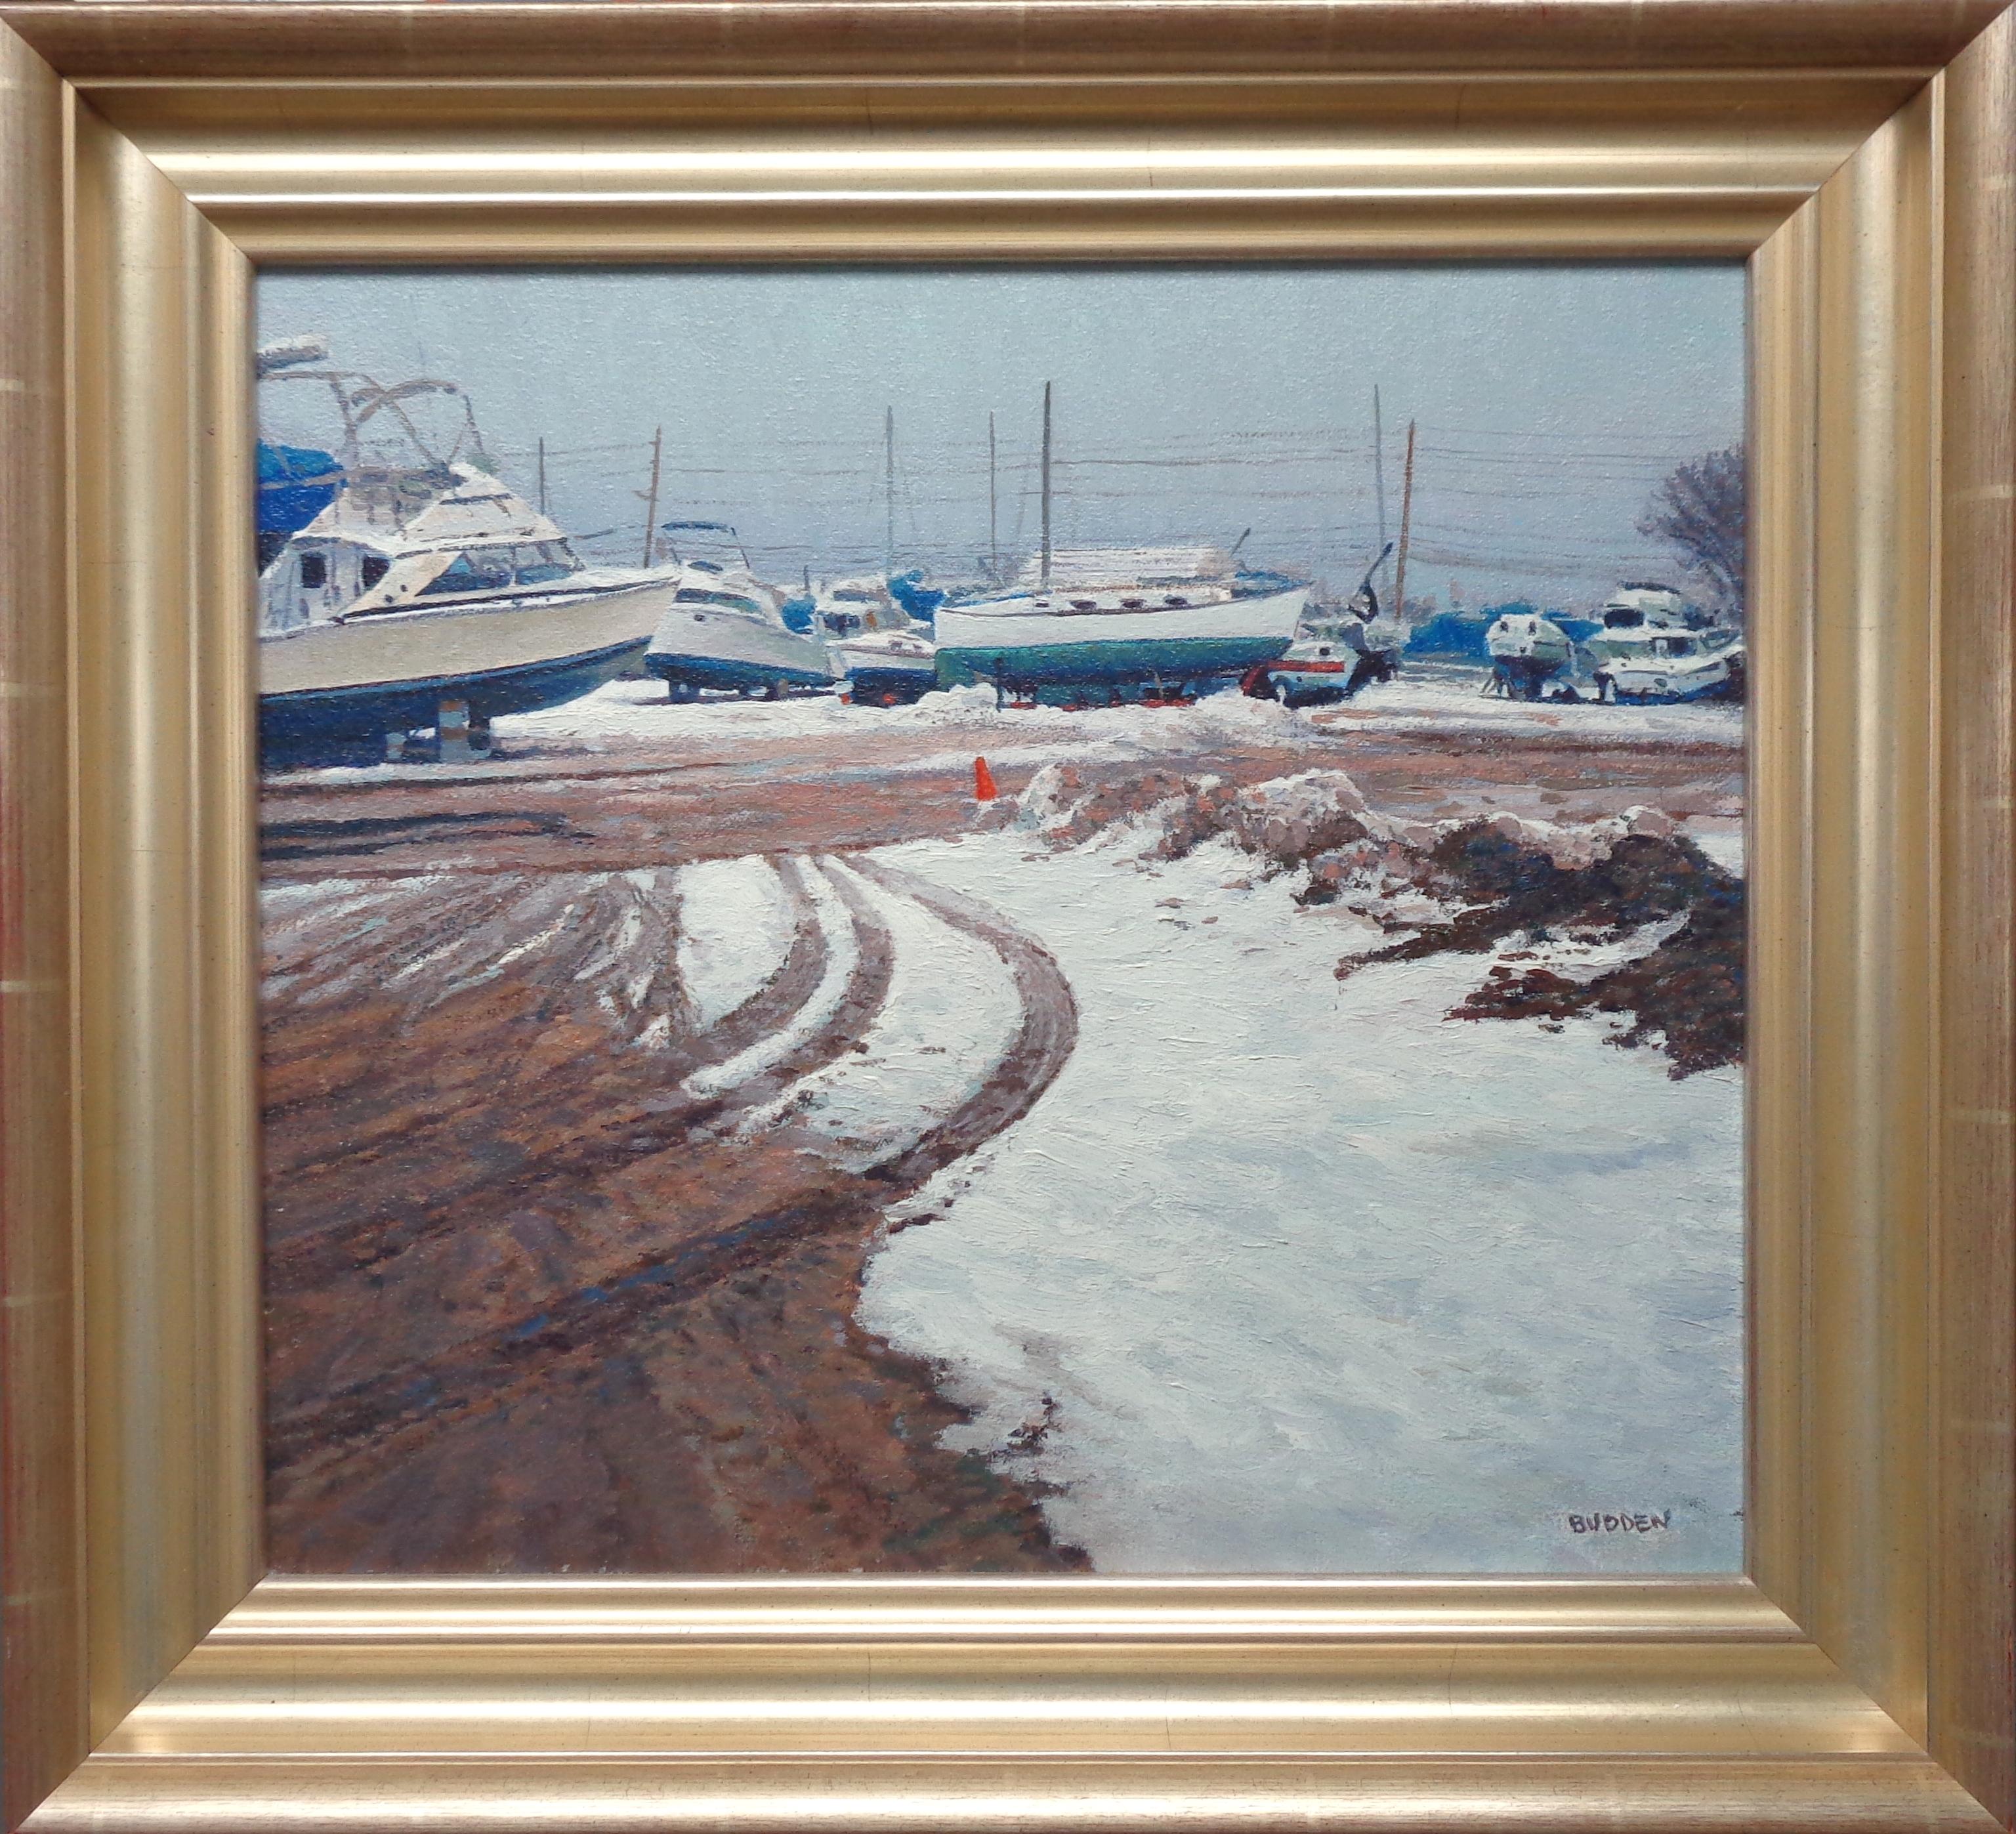 Winter at Beattons Boat Yard is an oil painting on canvas by award winning contemporary artist Michael Budden that showcases a beautiful winter view of boats at Beattons Boat yard in Pt Pleasant NJ. The image measures 16 x 18 unframed and 20.75 x